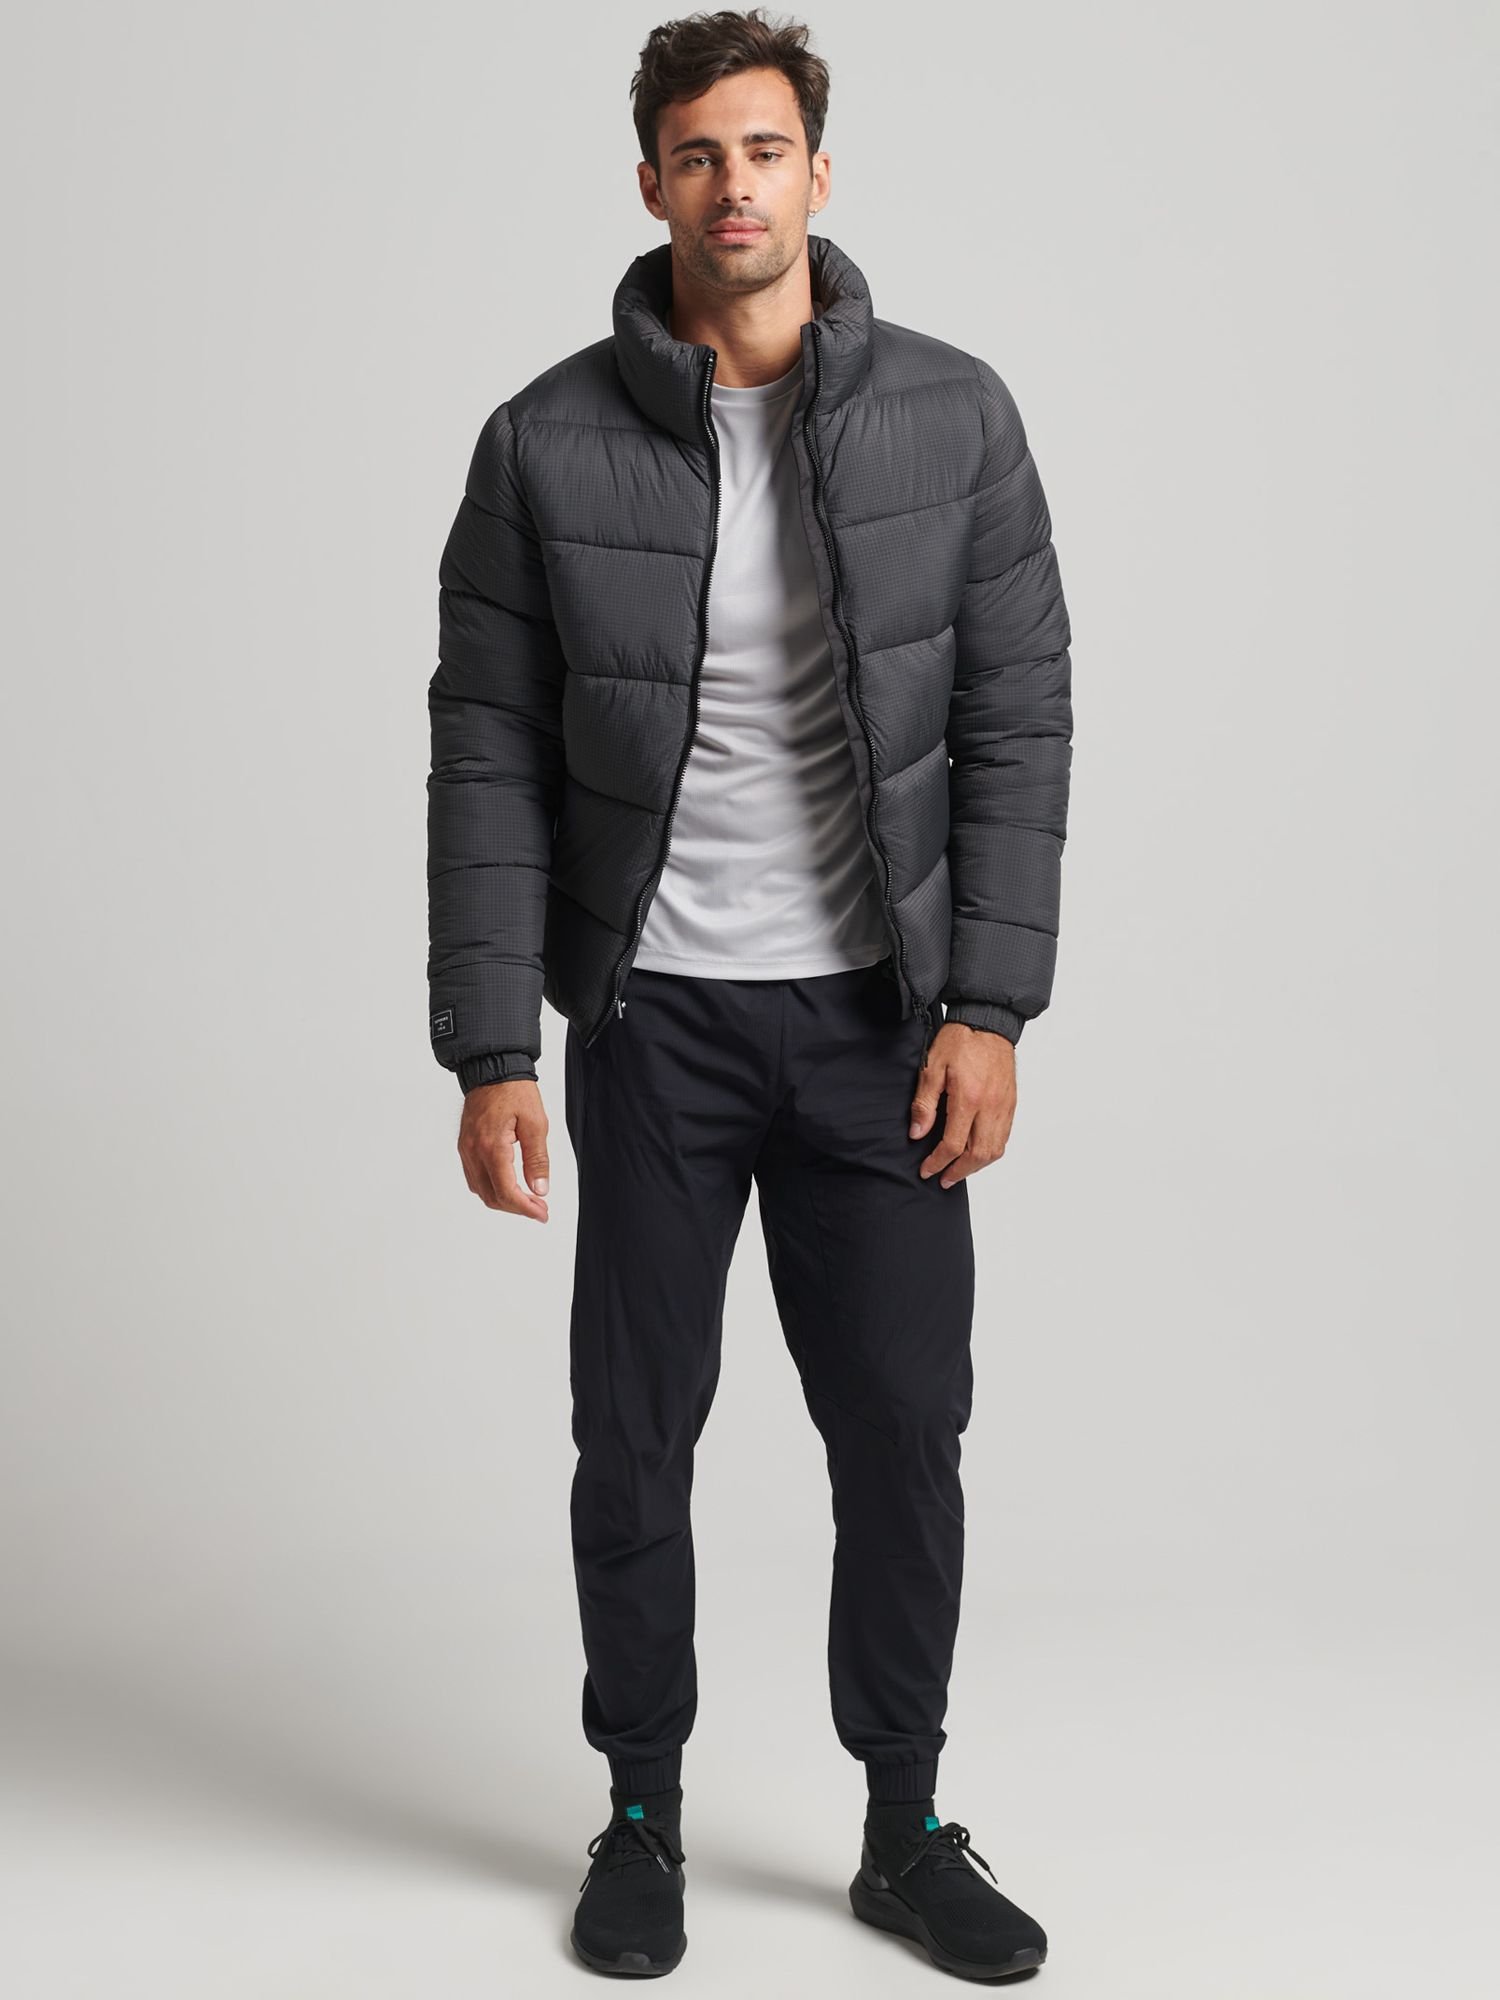 Hooded XPD Sports Puffer Jacket